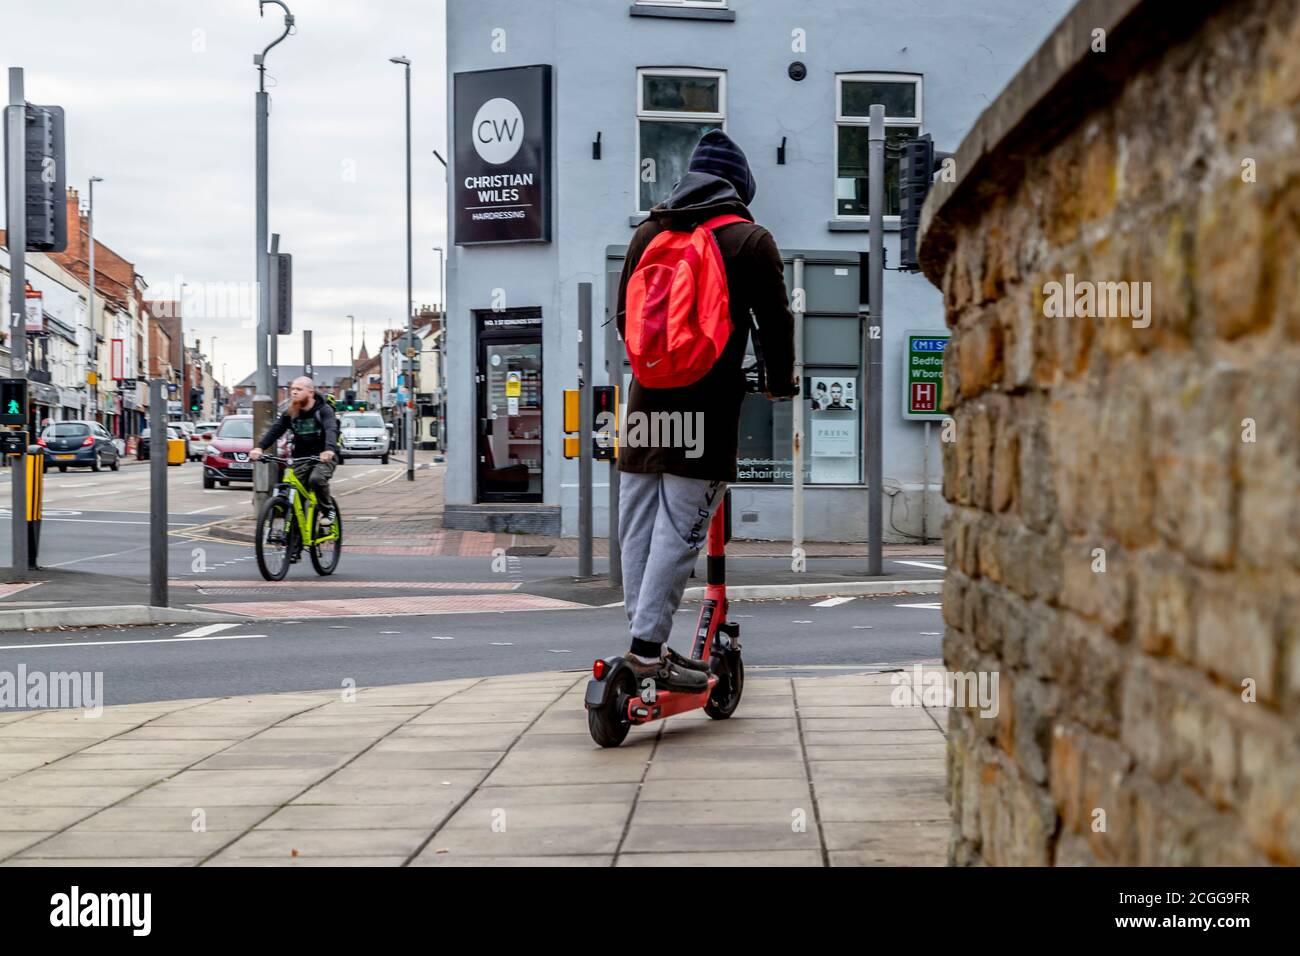 Northampton, UK, 11th September 2020. 300 e-scooters are hitting the streets in Northampton and Kettering in a 12 month trial between Smart Move Northamptonshire and Voi digital e-scooter (photos this morning in the town centre). Riders will need a provisional driver’s licence and the Voi’s app, the e-scooter will cost £1 to unlock + £0.20 per minute and can be left anywhere when finished with, another trial started in Birmingham city center yesterday. Credit: Keith J Smith./Alamy Live News Stock Photo